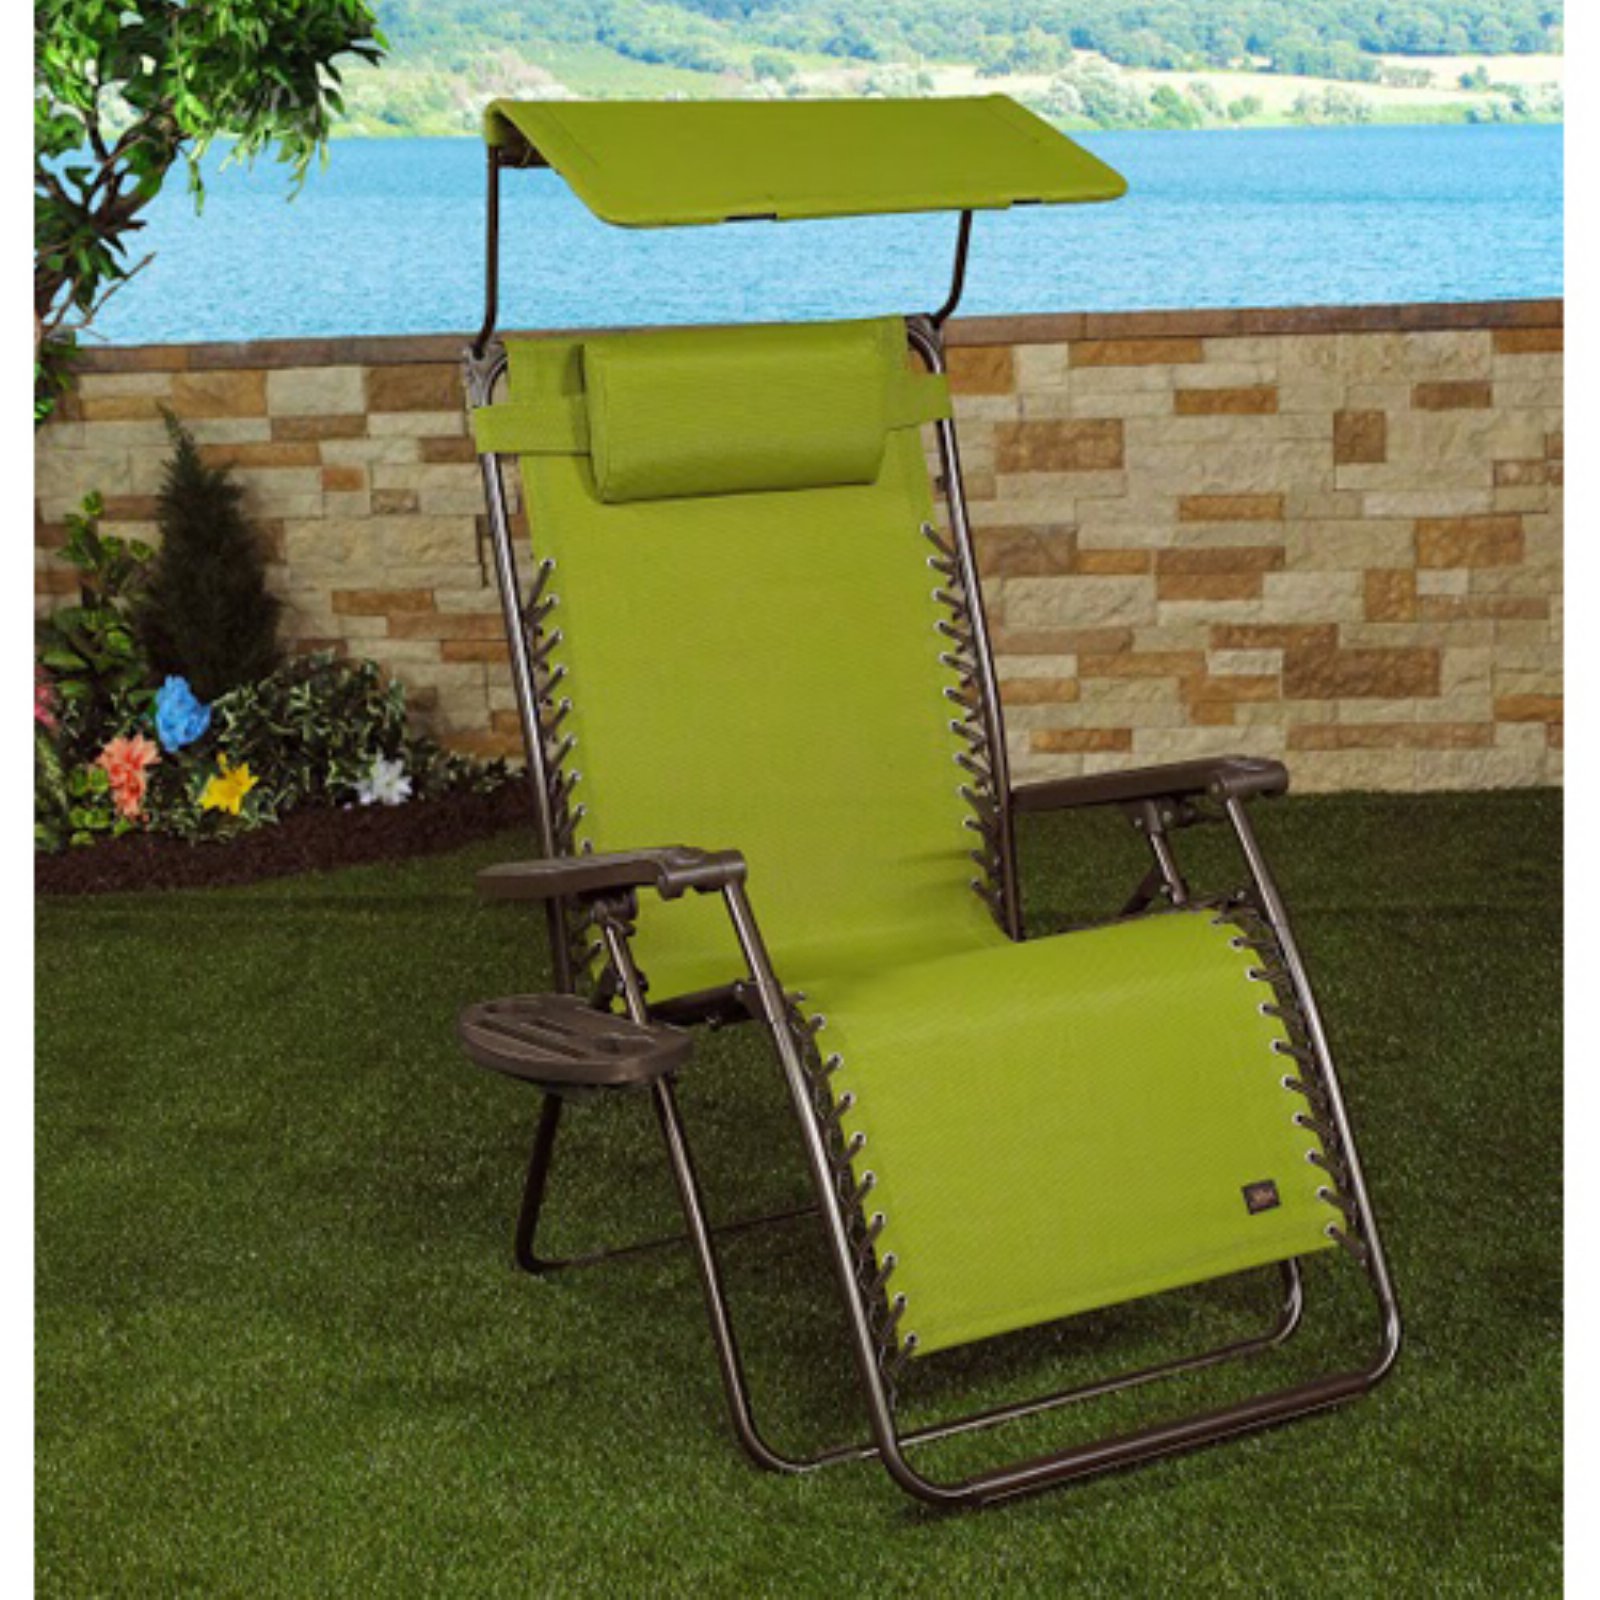 Bliss Hammocks 30" Wide XL Zero Gravity Chair w/ Canopy, Pillow, & Drink Tray Folding Outdoor Lawn, Deck, Patio Adjustable Lounge Chair, 360 lbs. Capacity, Weather and Rust Resistant, Sage Green - image 2 of 11